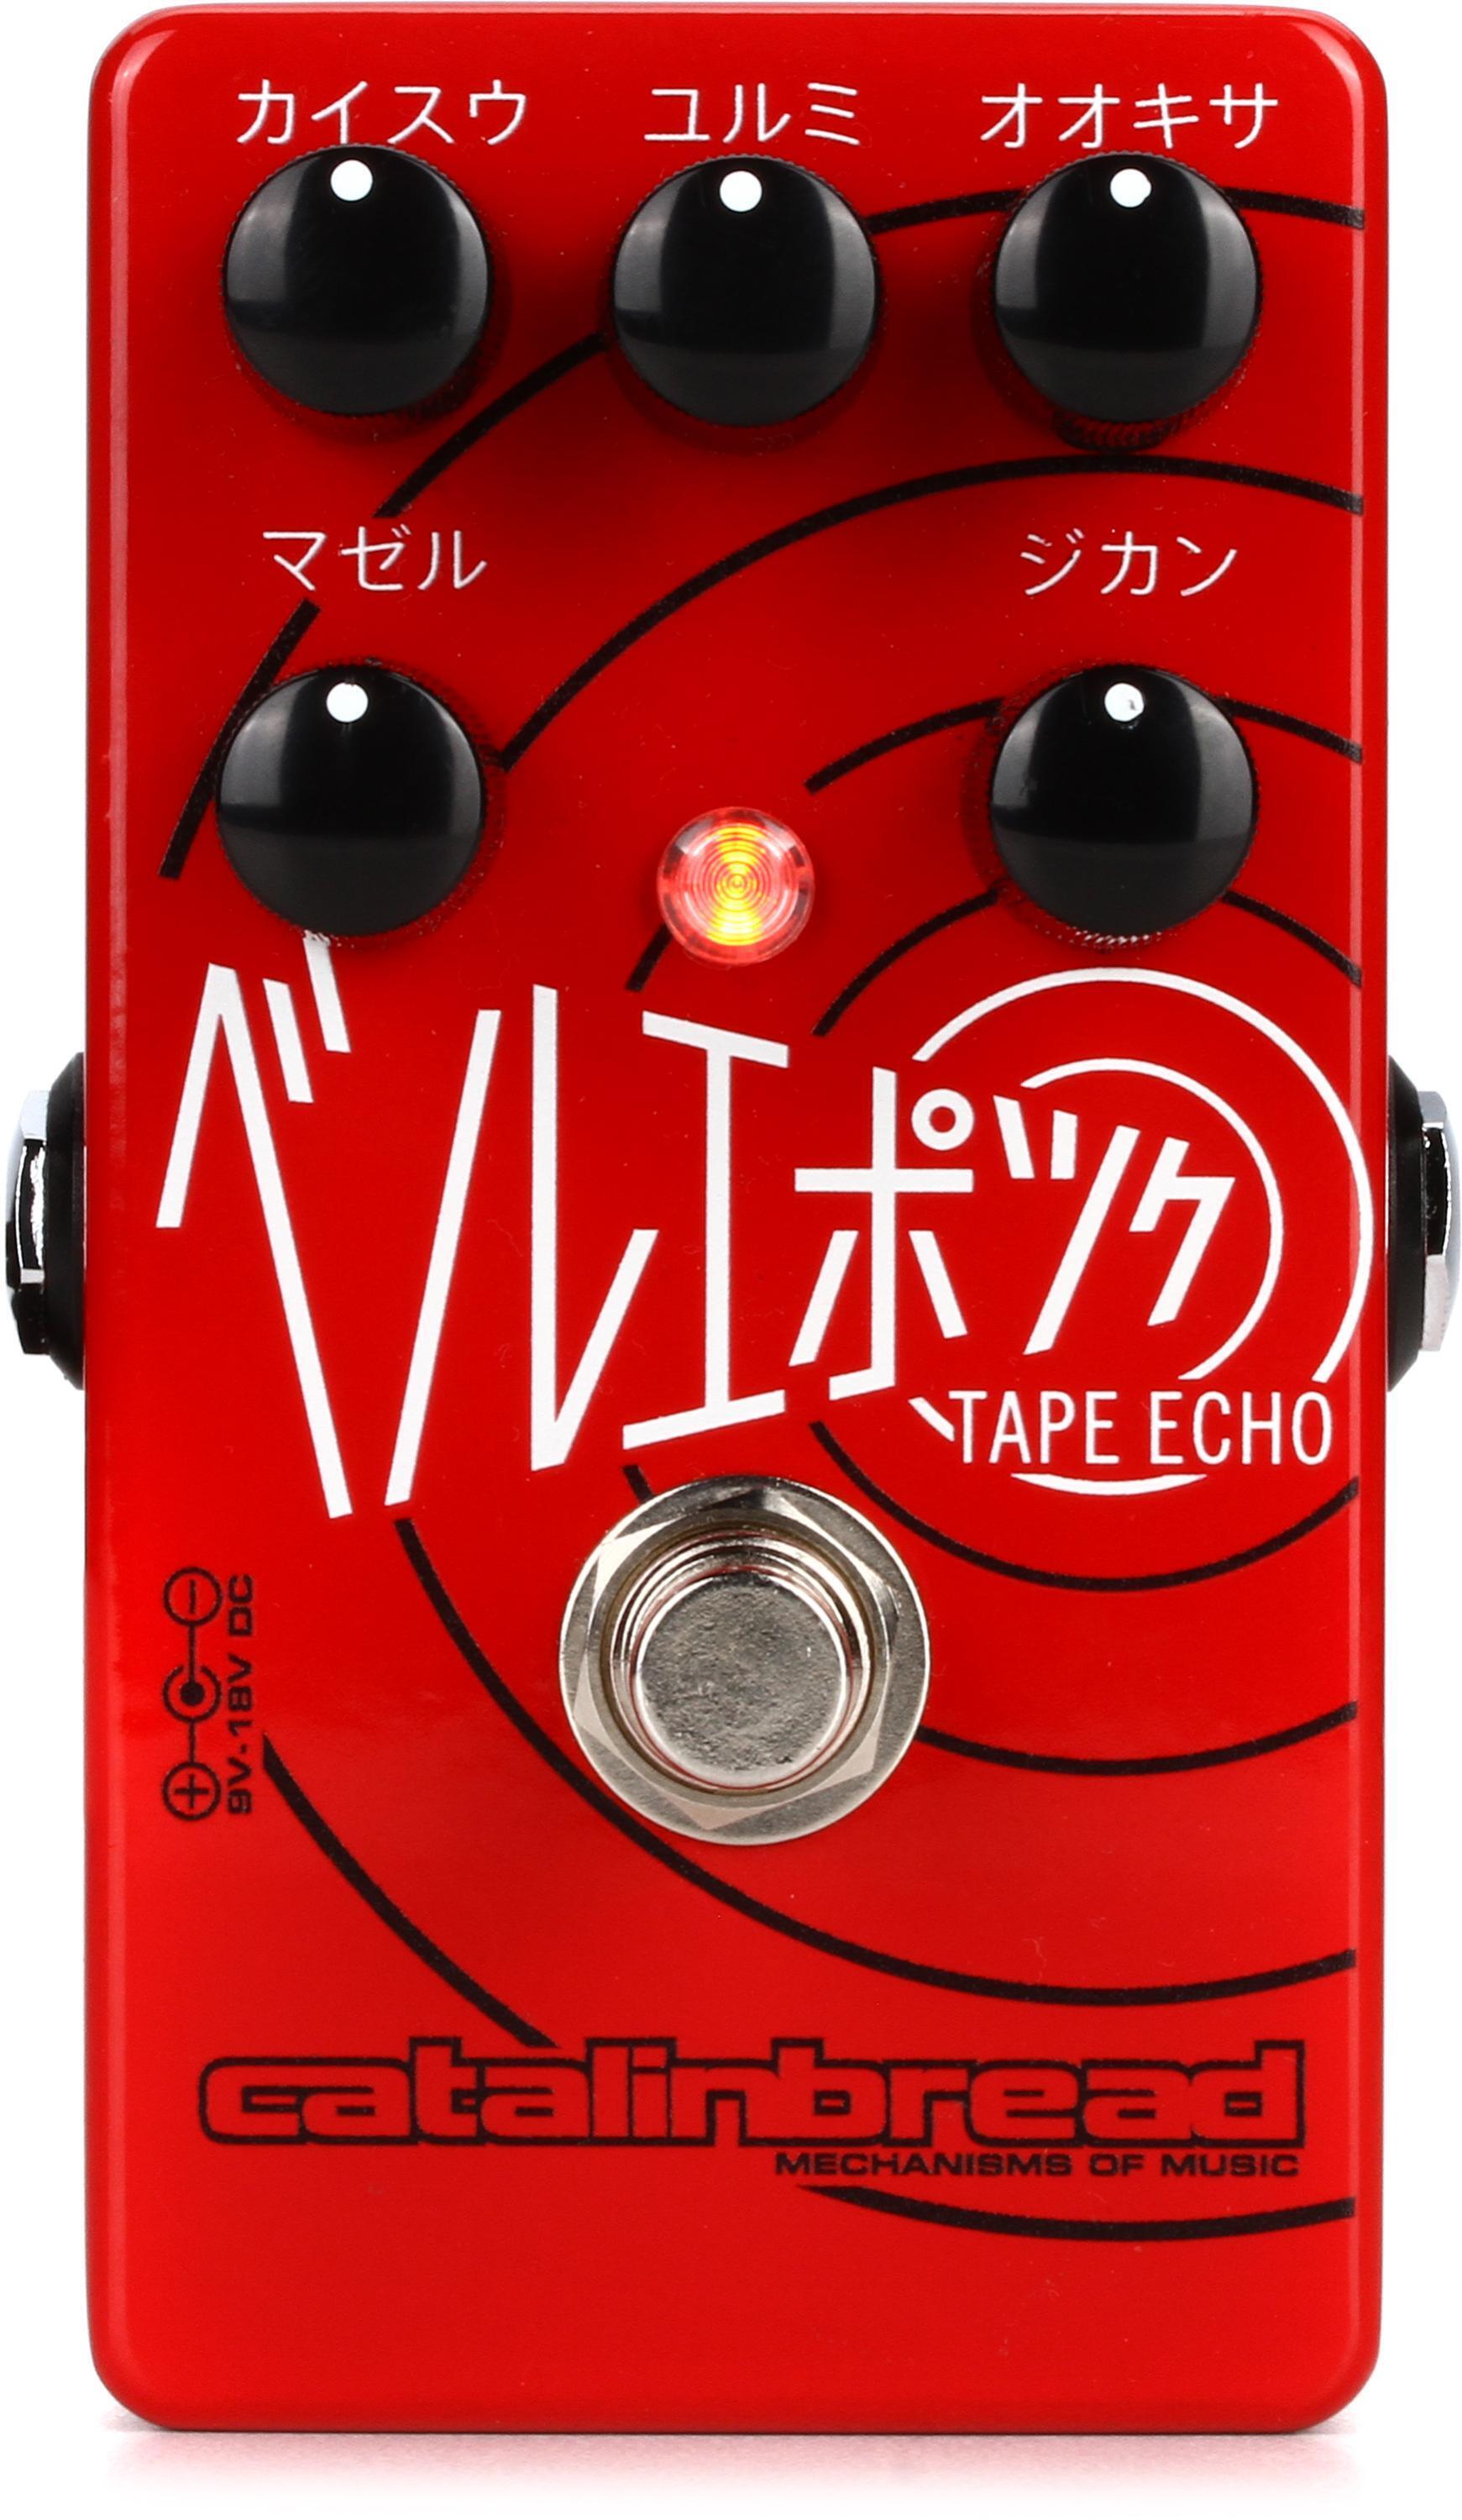 Catalinbread Belle Epoch Tape Echo Pedal - Limited Edition Japanese